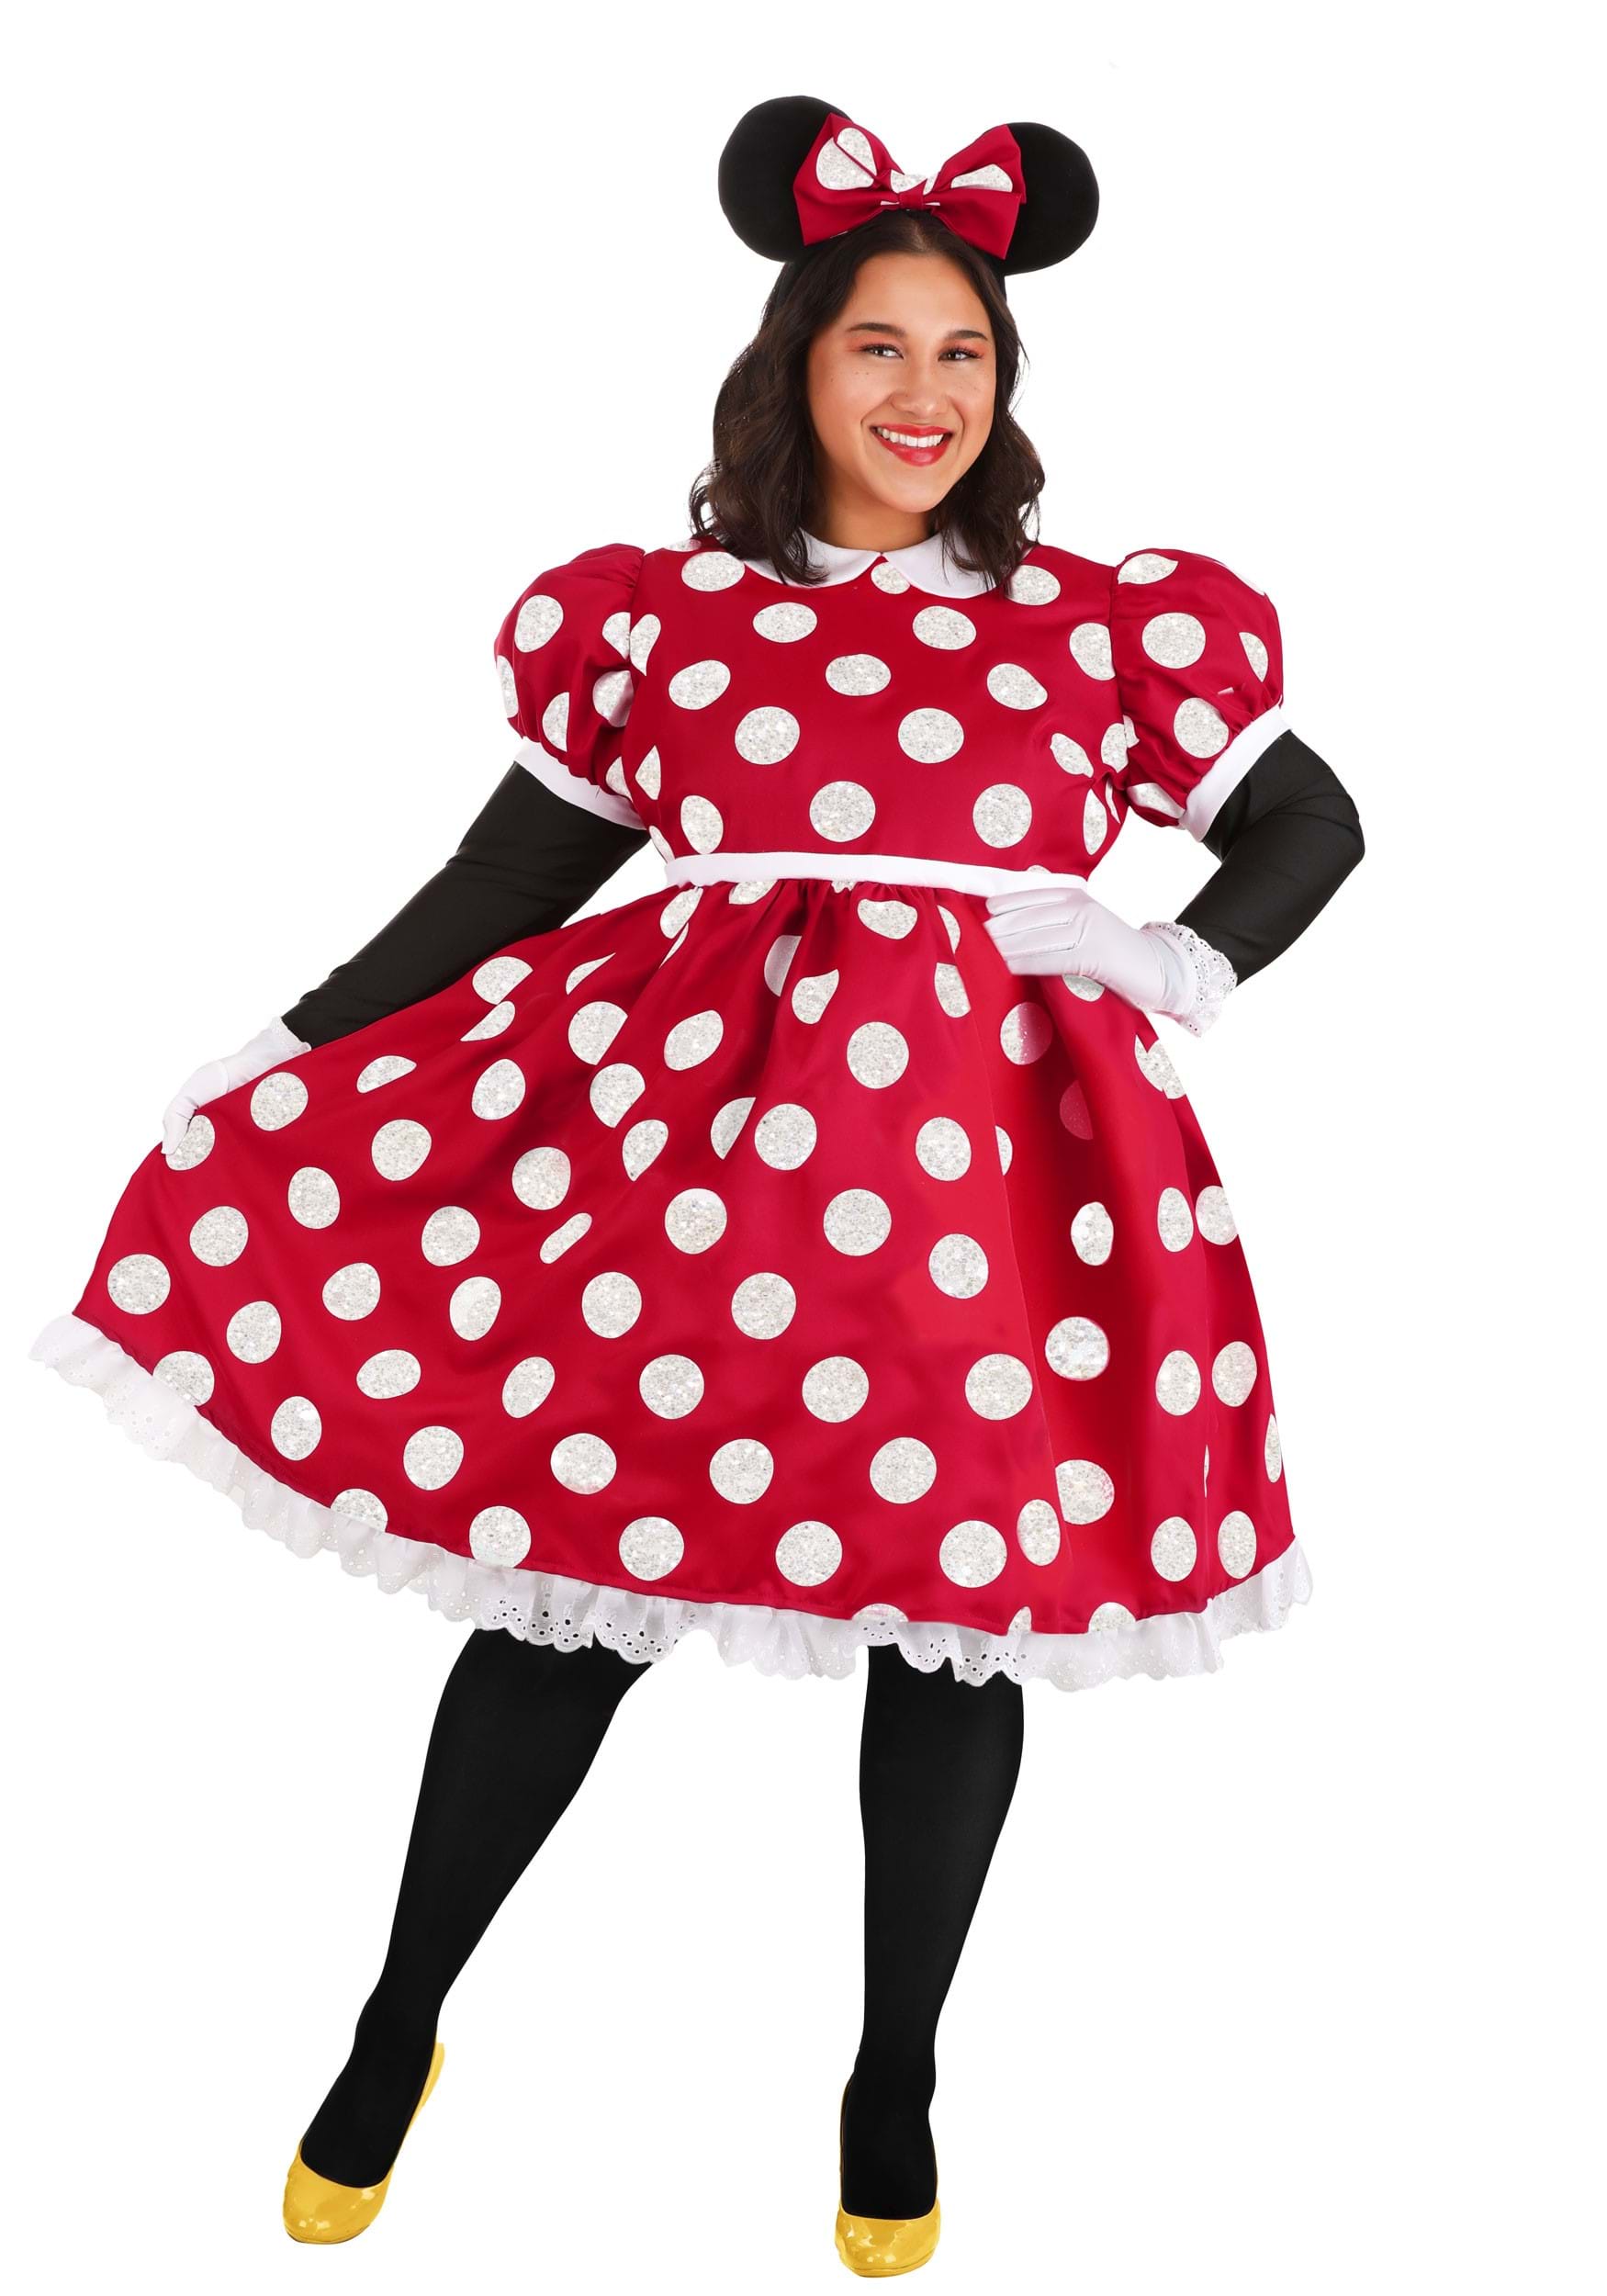 Photos - Fancy Dress Disney FUN Costumes Plus Size Deluxe Minnie Mouse Costume for Women |  Cost 